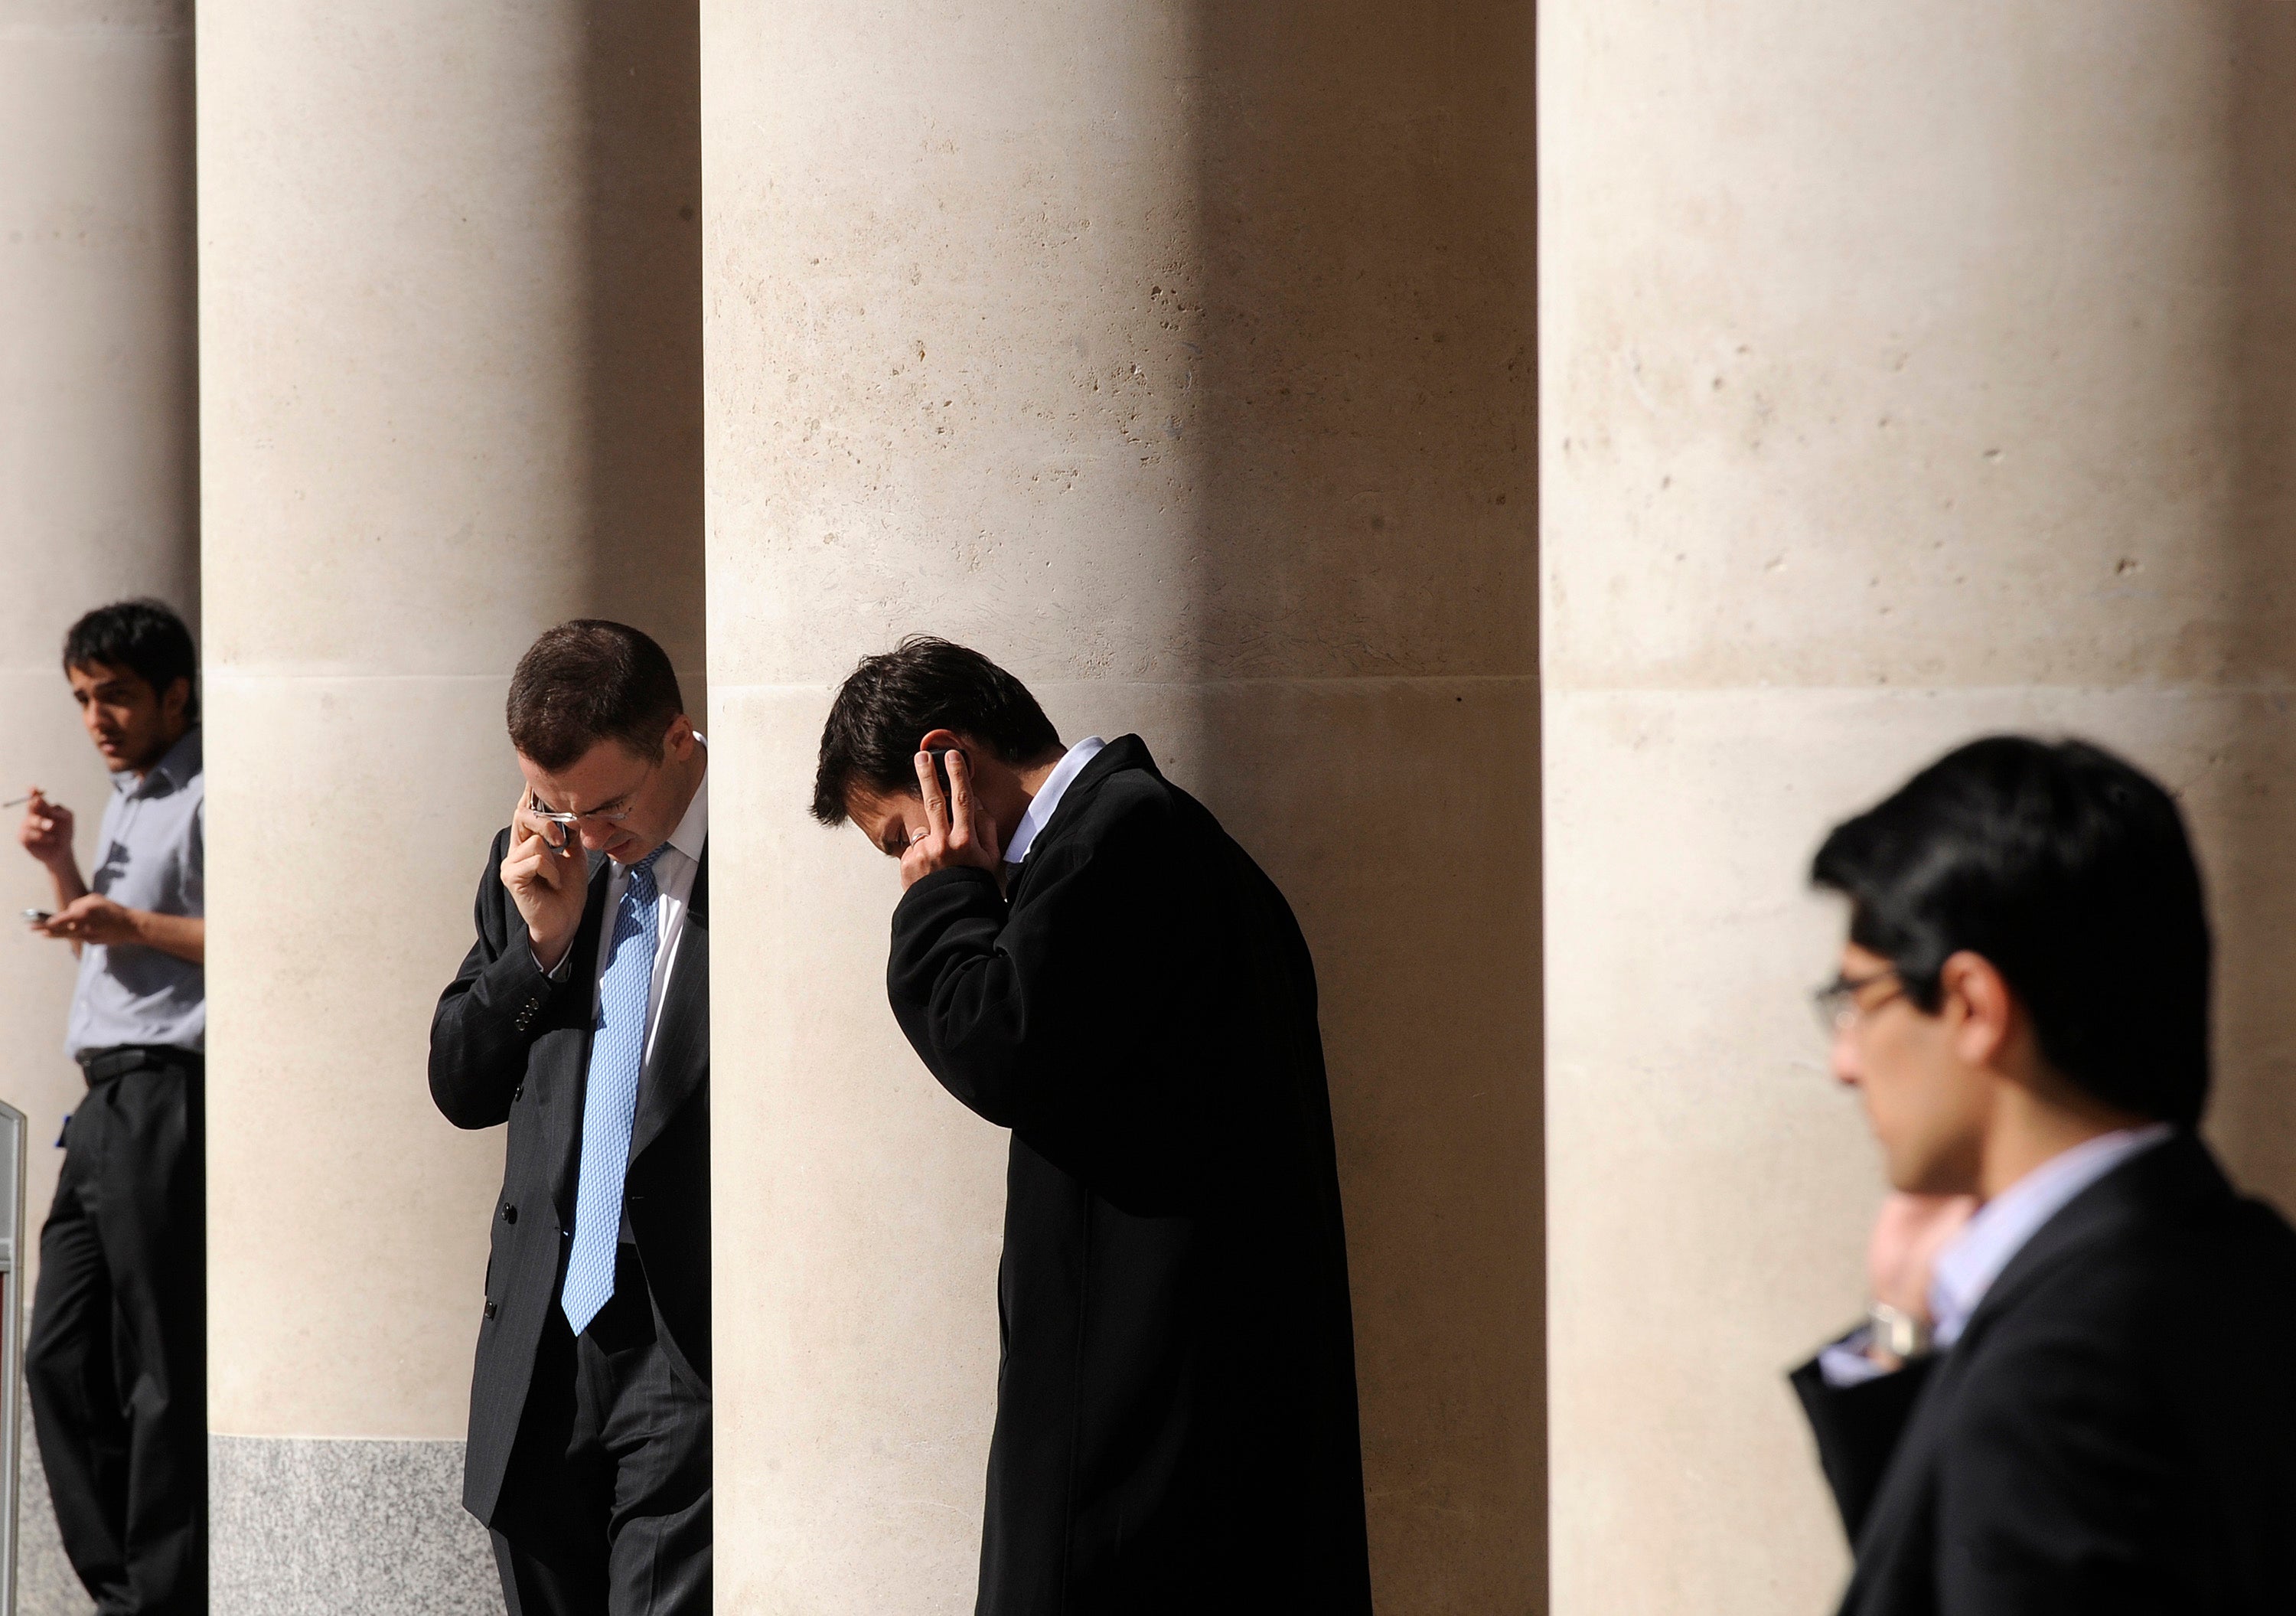 2008City workers make phone calls outside the London Stock Exchange in Paternoster Square in the City of London at lunchtime October 1, 2008.